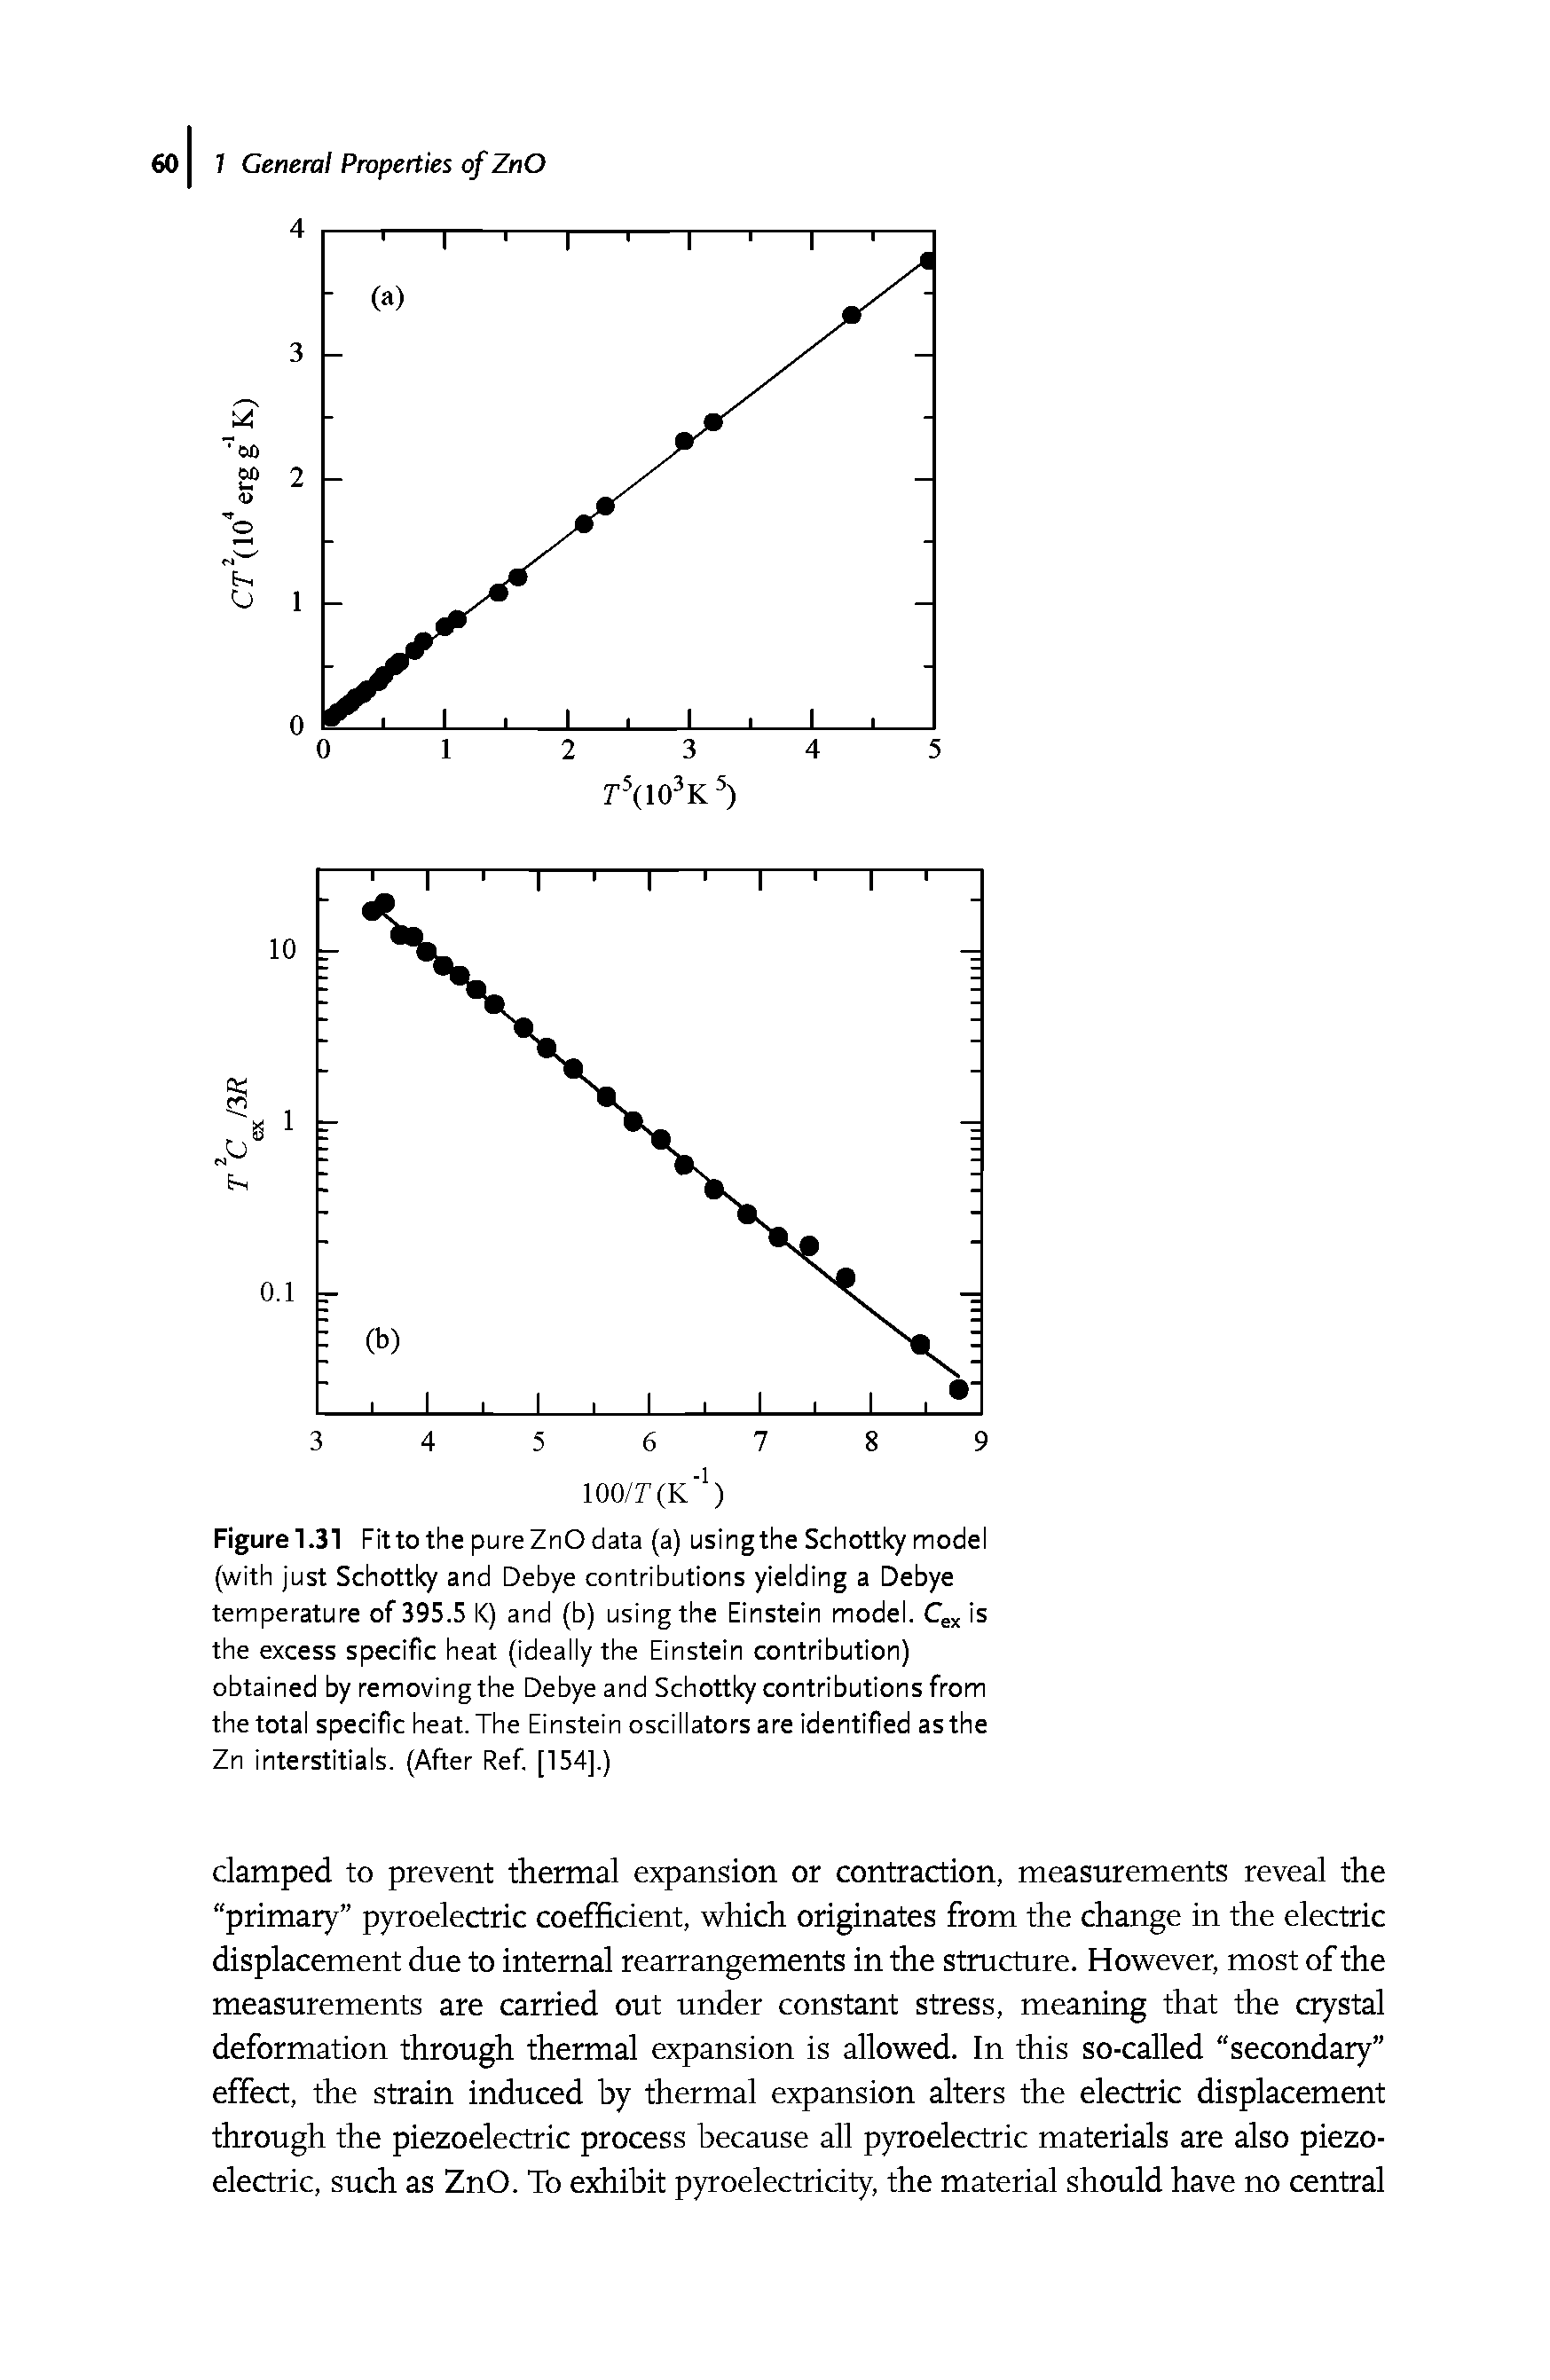 Figure 1.31 Fit to the pure ZnO data (a) usingthe Schottky model (with just Schottky and Debye contributions yielding a Debye temperature of 395.5 K) and (b) using the Einstein model. is the excess specific heat (ideally the Einstein contribution) obtained by removing the Debye and Schottky contributions from the total specific heat. The Einstein oscillators are identified as the Zn interstitials. (After Ref [154].)...